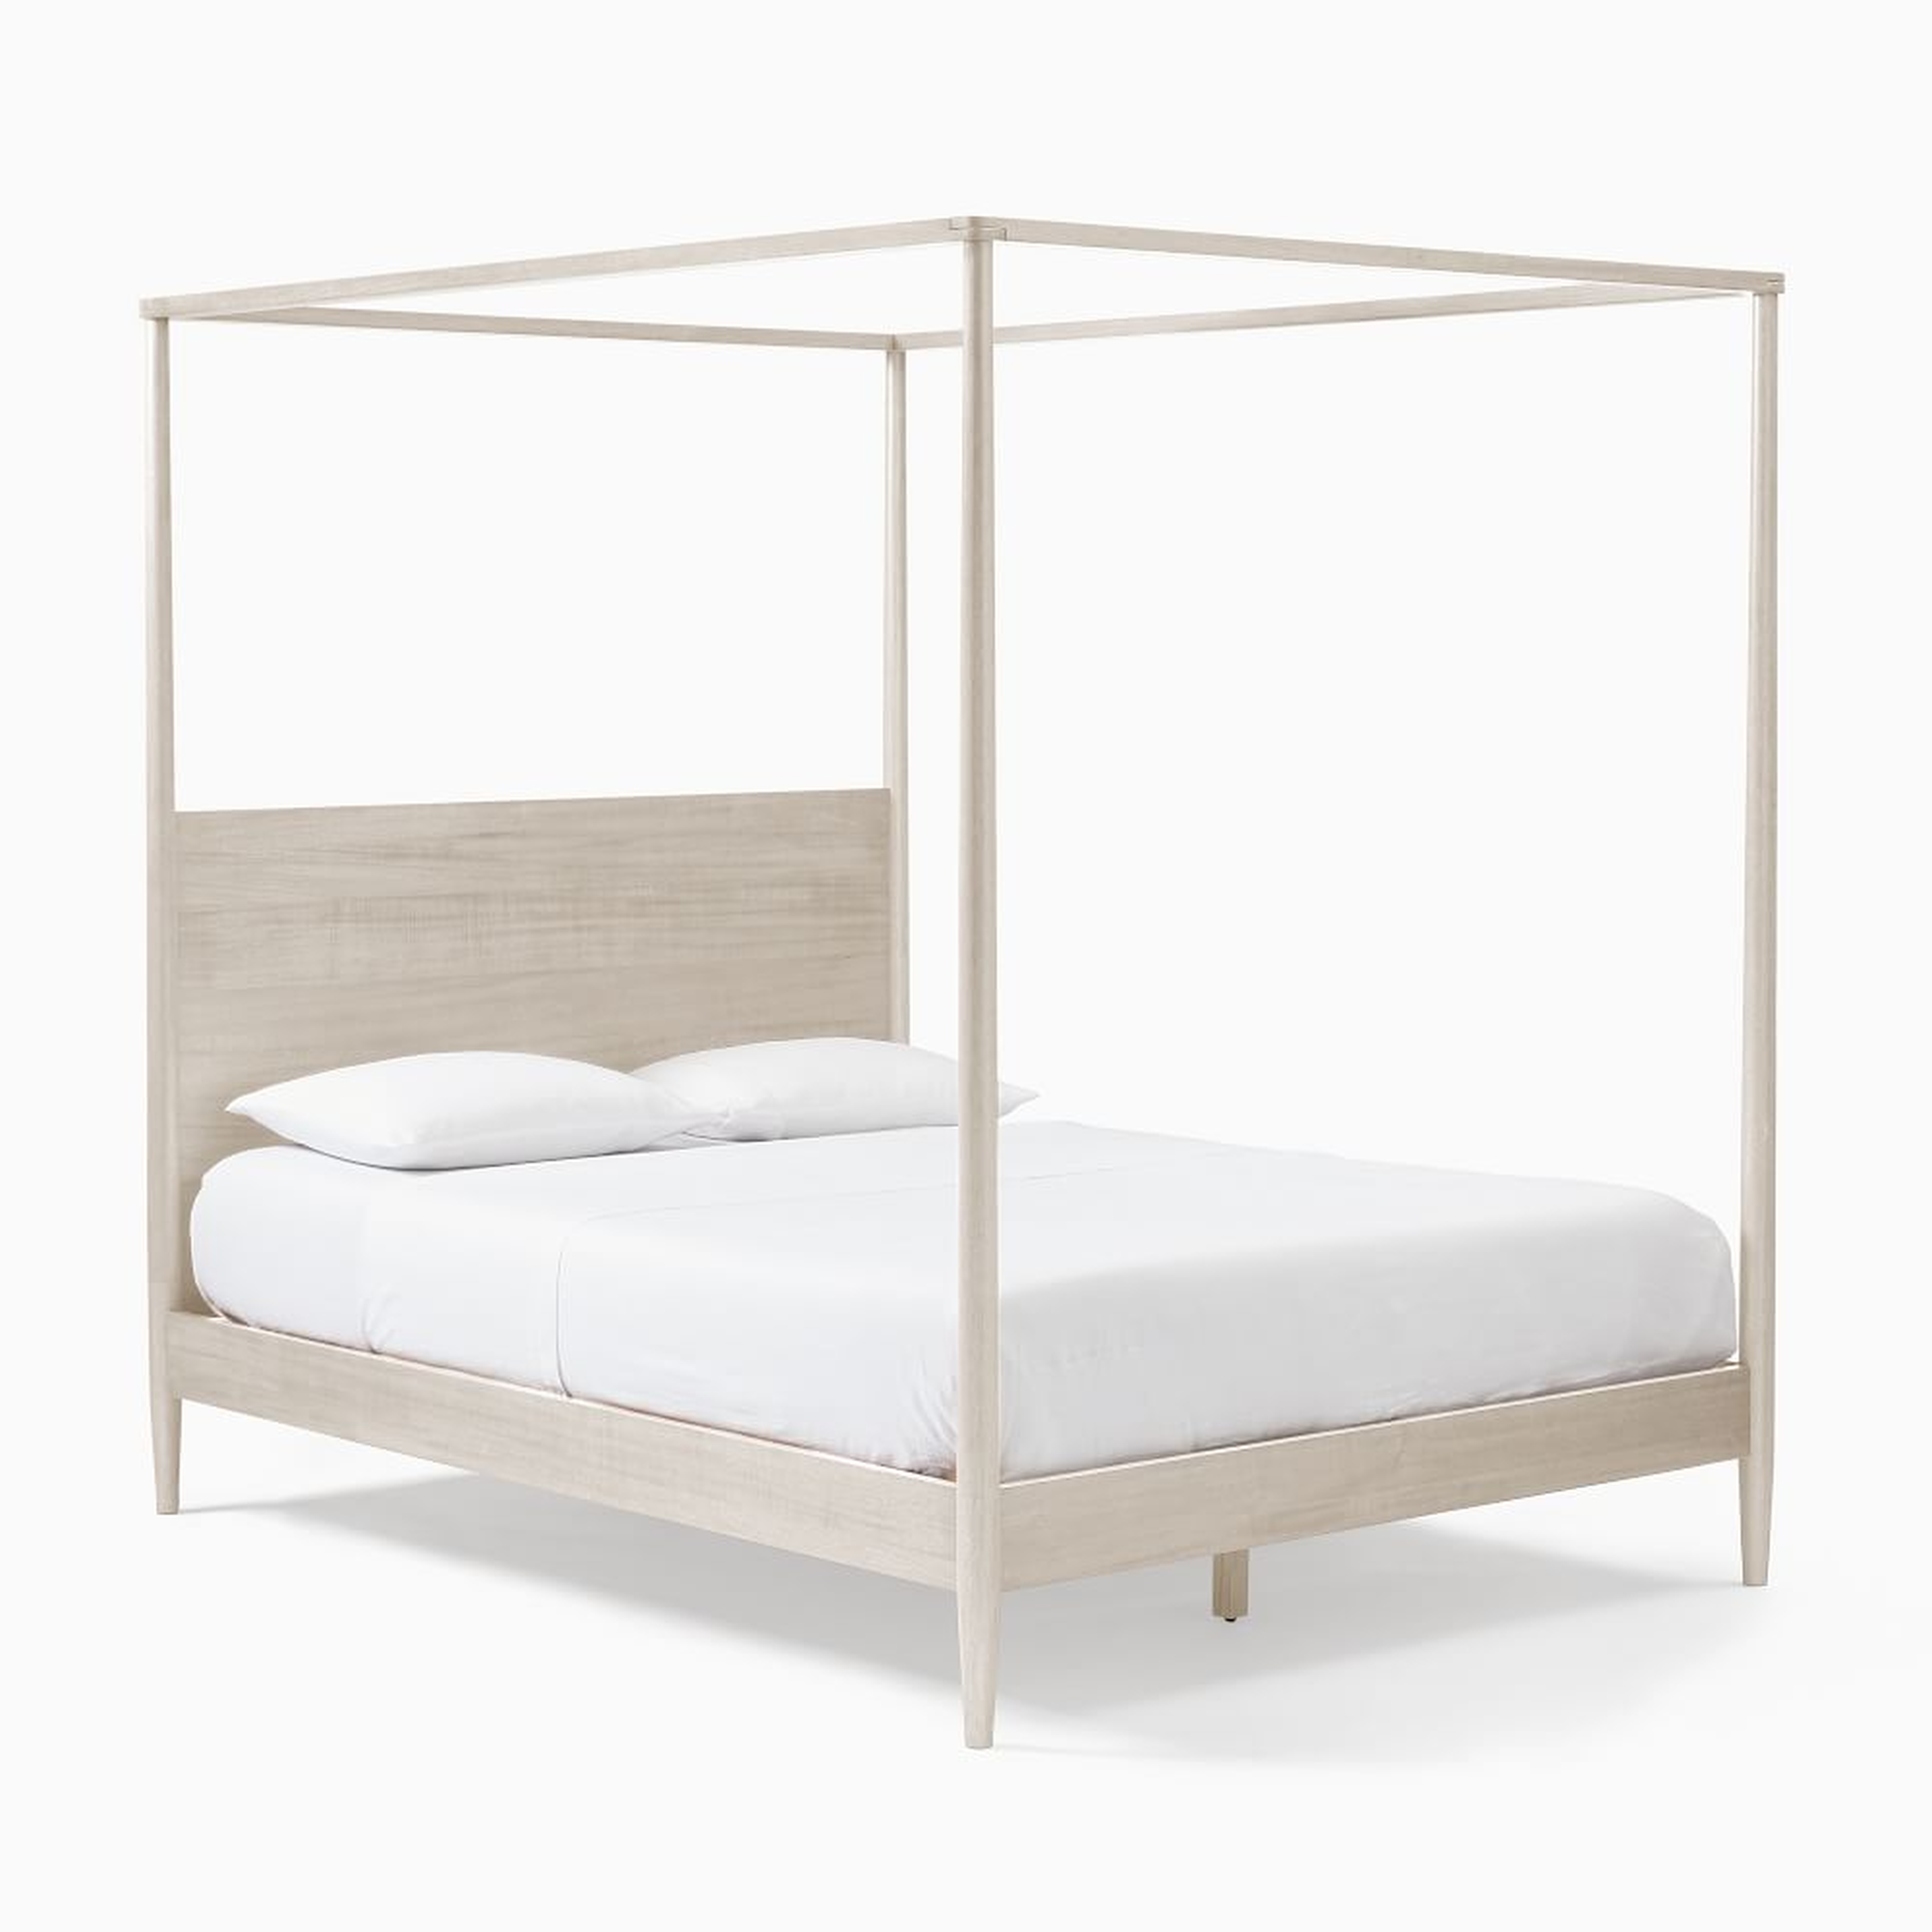 Mid-Century Canopy Bed, King, Pebble - West Elm